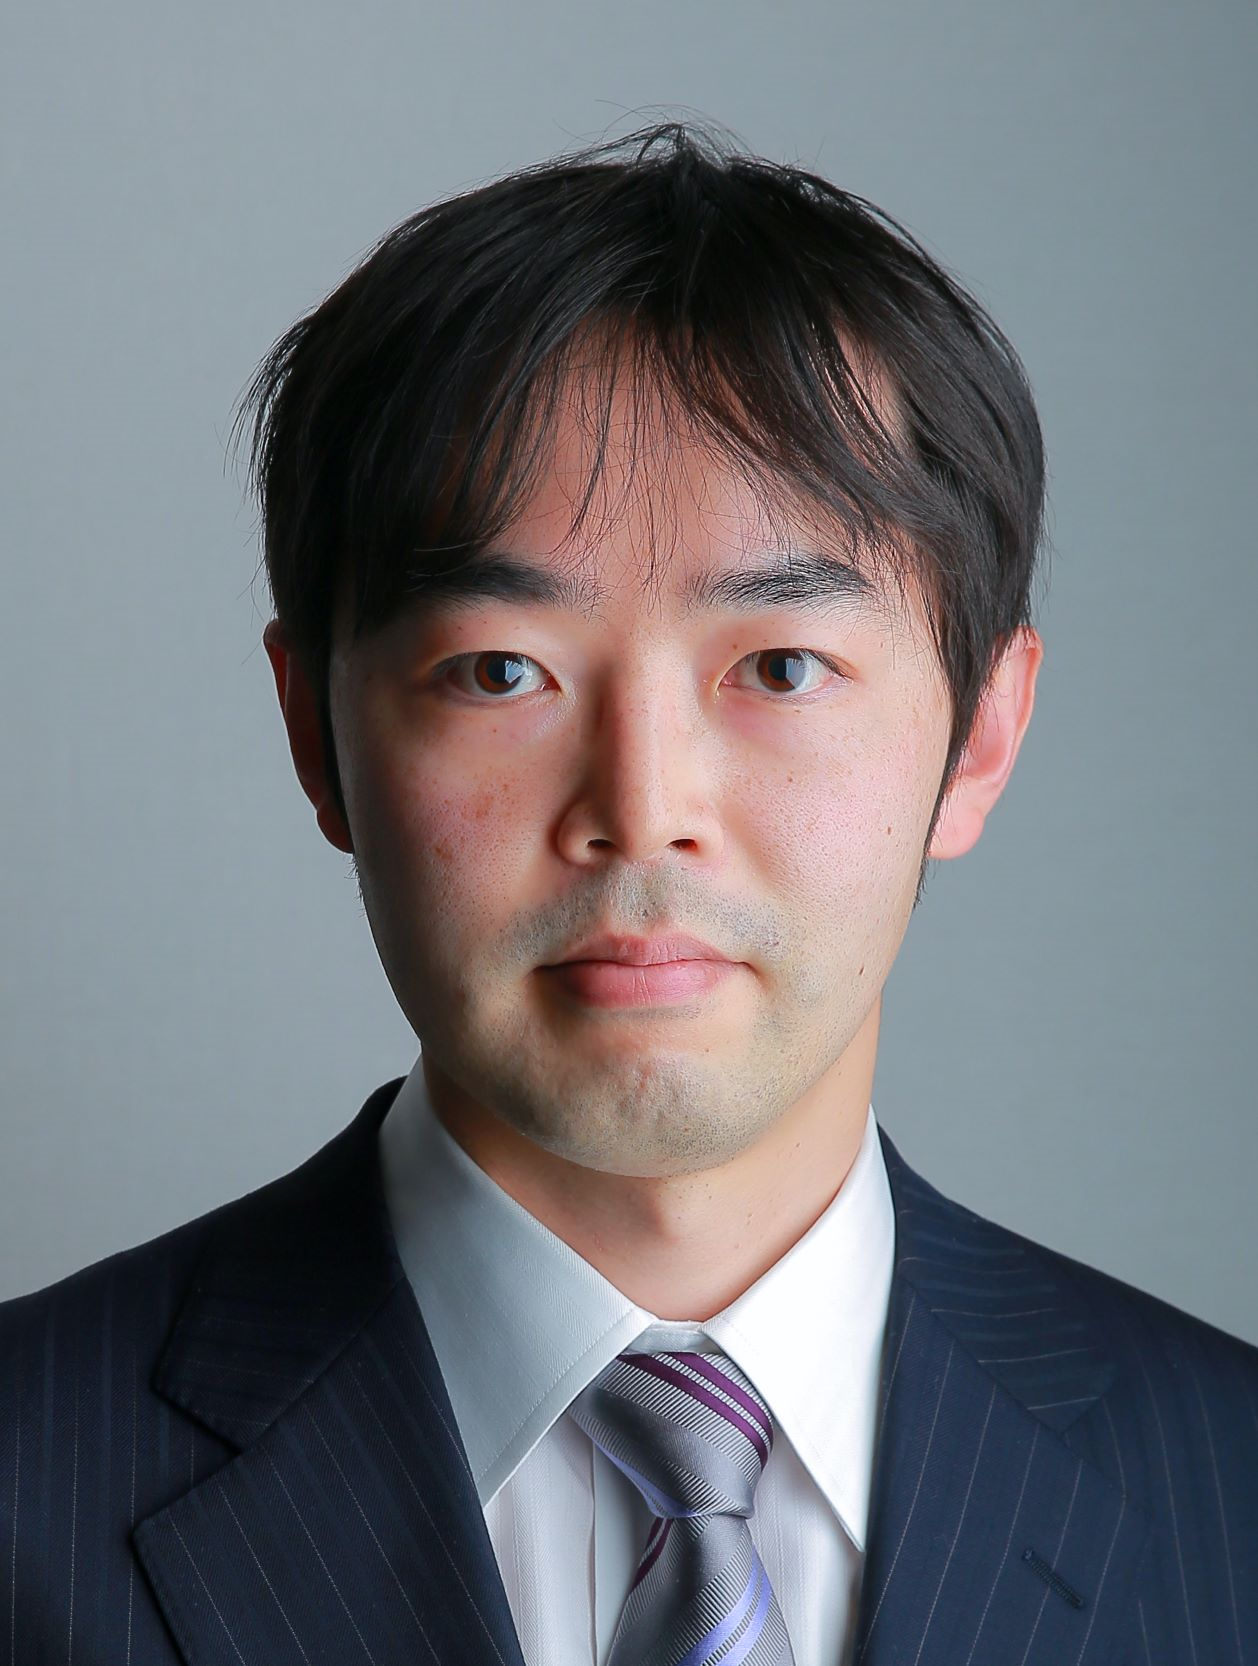 Associate Professor Naoto Tsuji receives the 2022 Young Scientist Award from the Minister of Education, Culture, Sports, Science and Technology.